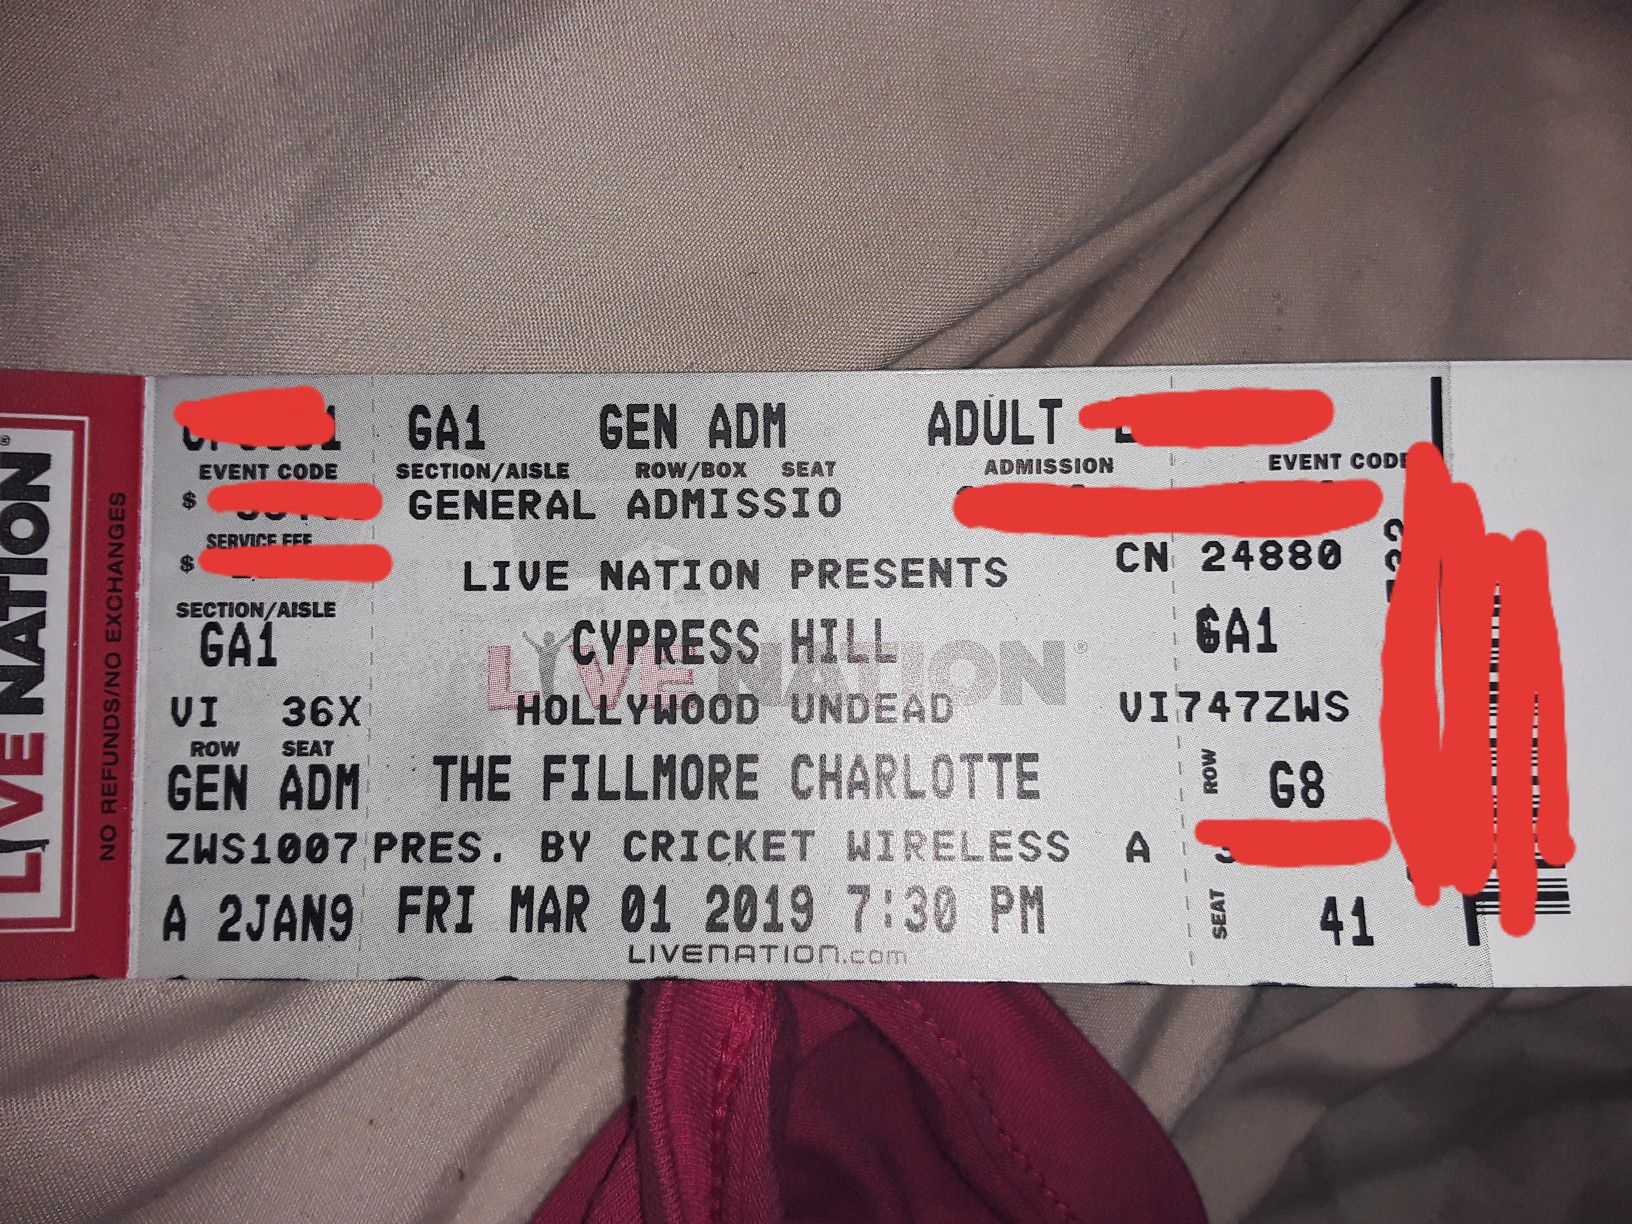 Hollywood Undead Ticket & VIP Pass